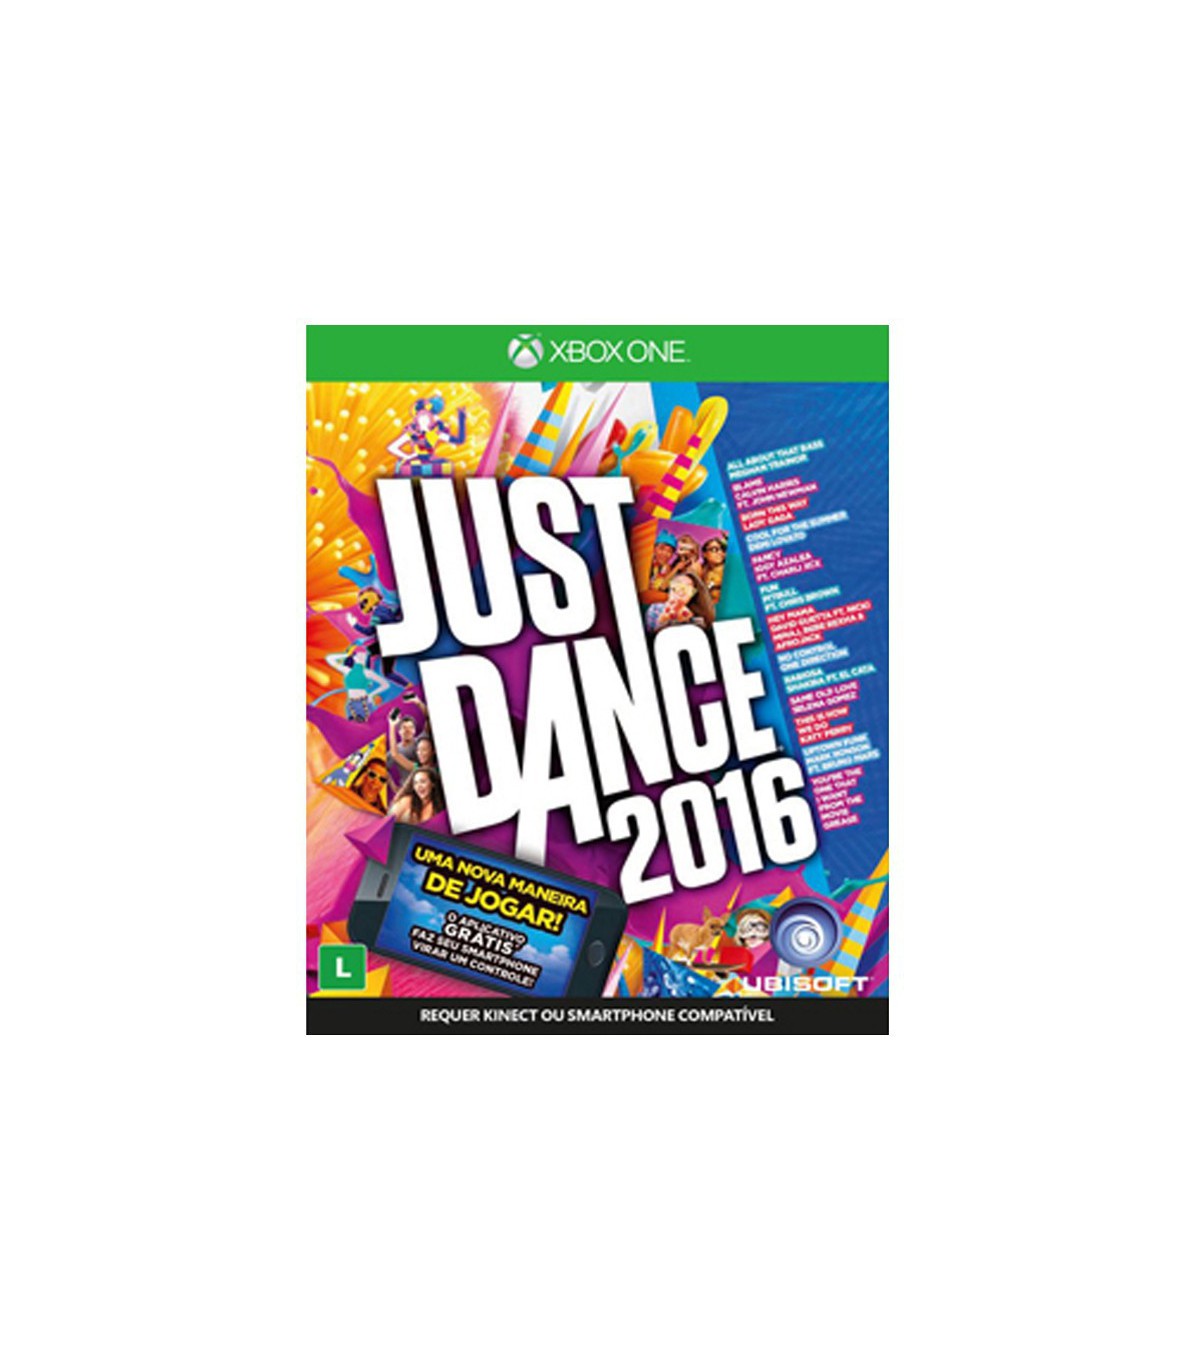 Just Dance 2016 کارکرده - ایکس باکس وان